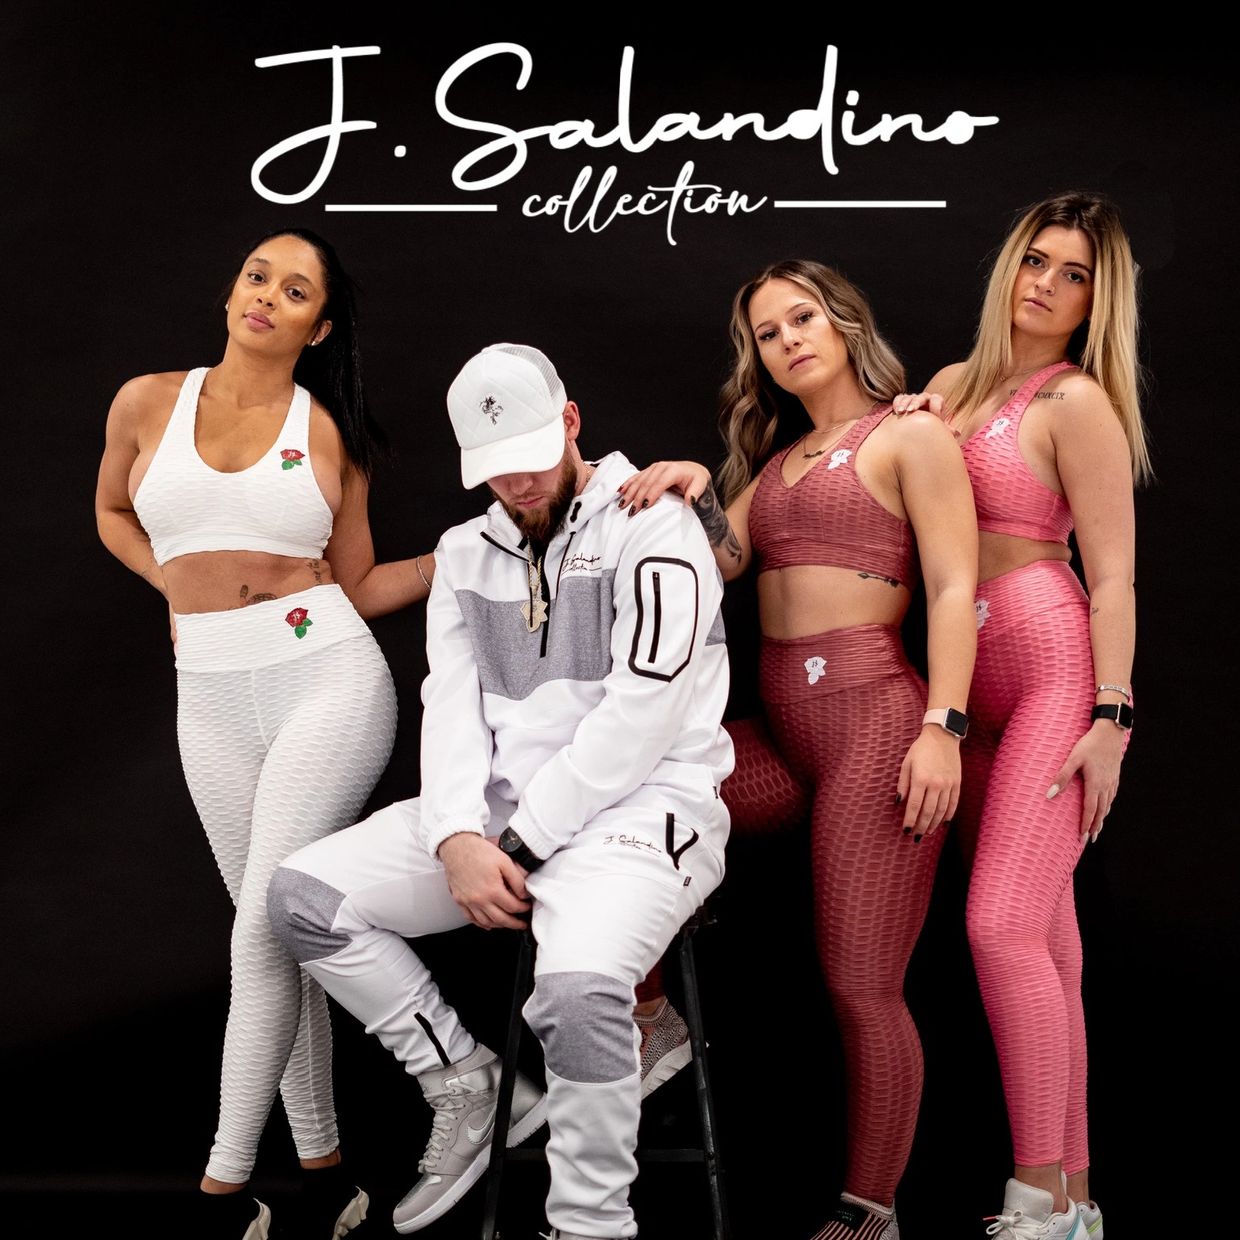 J. Salandino Collection outerwear and workout clothing